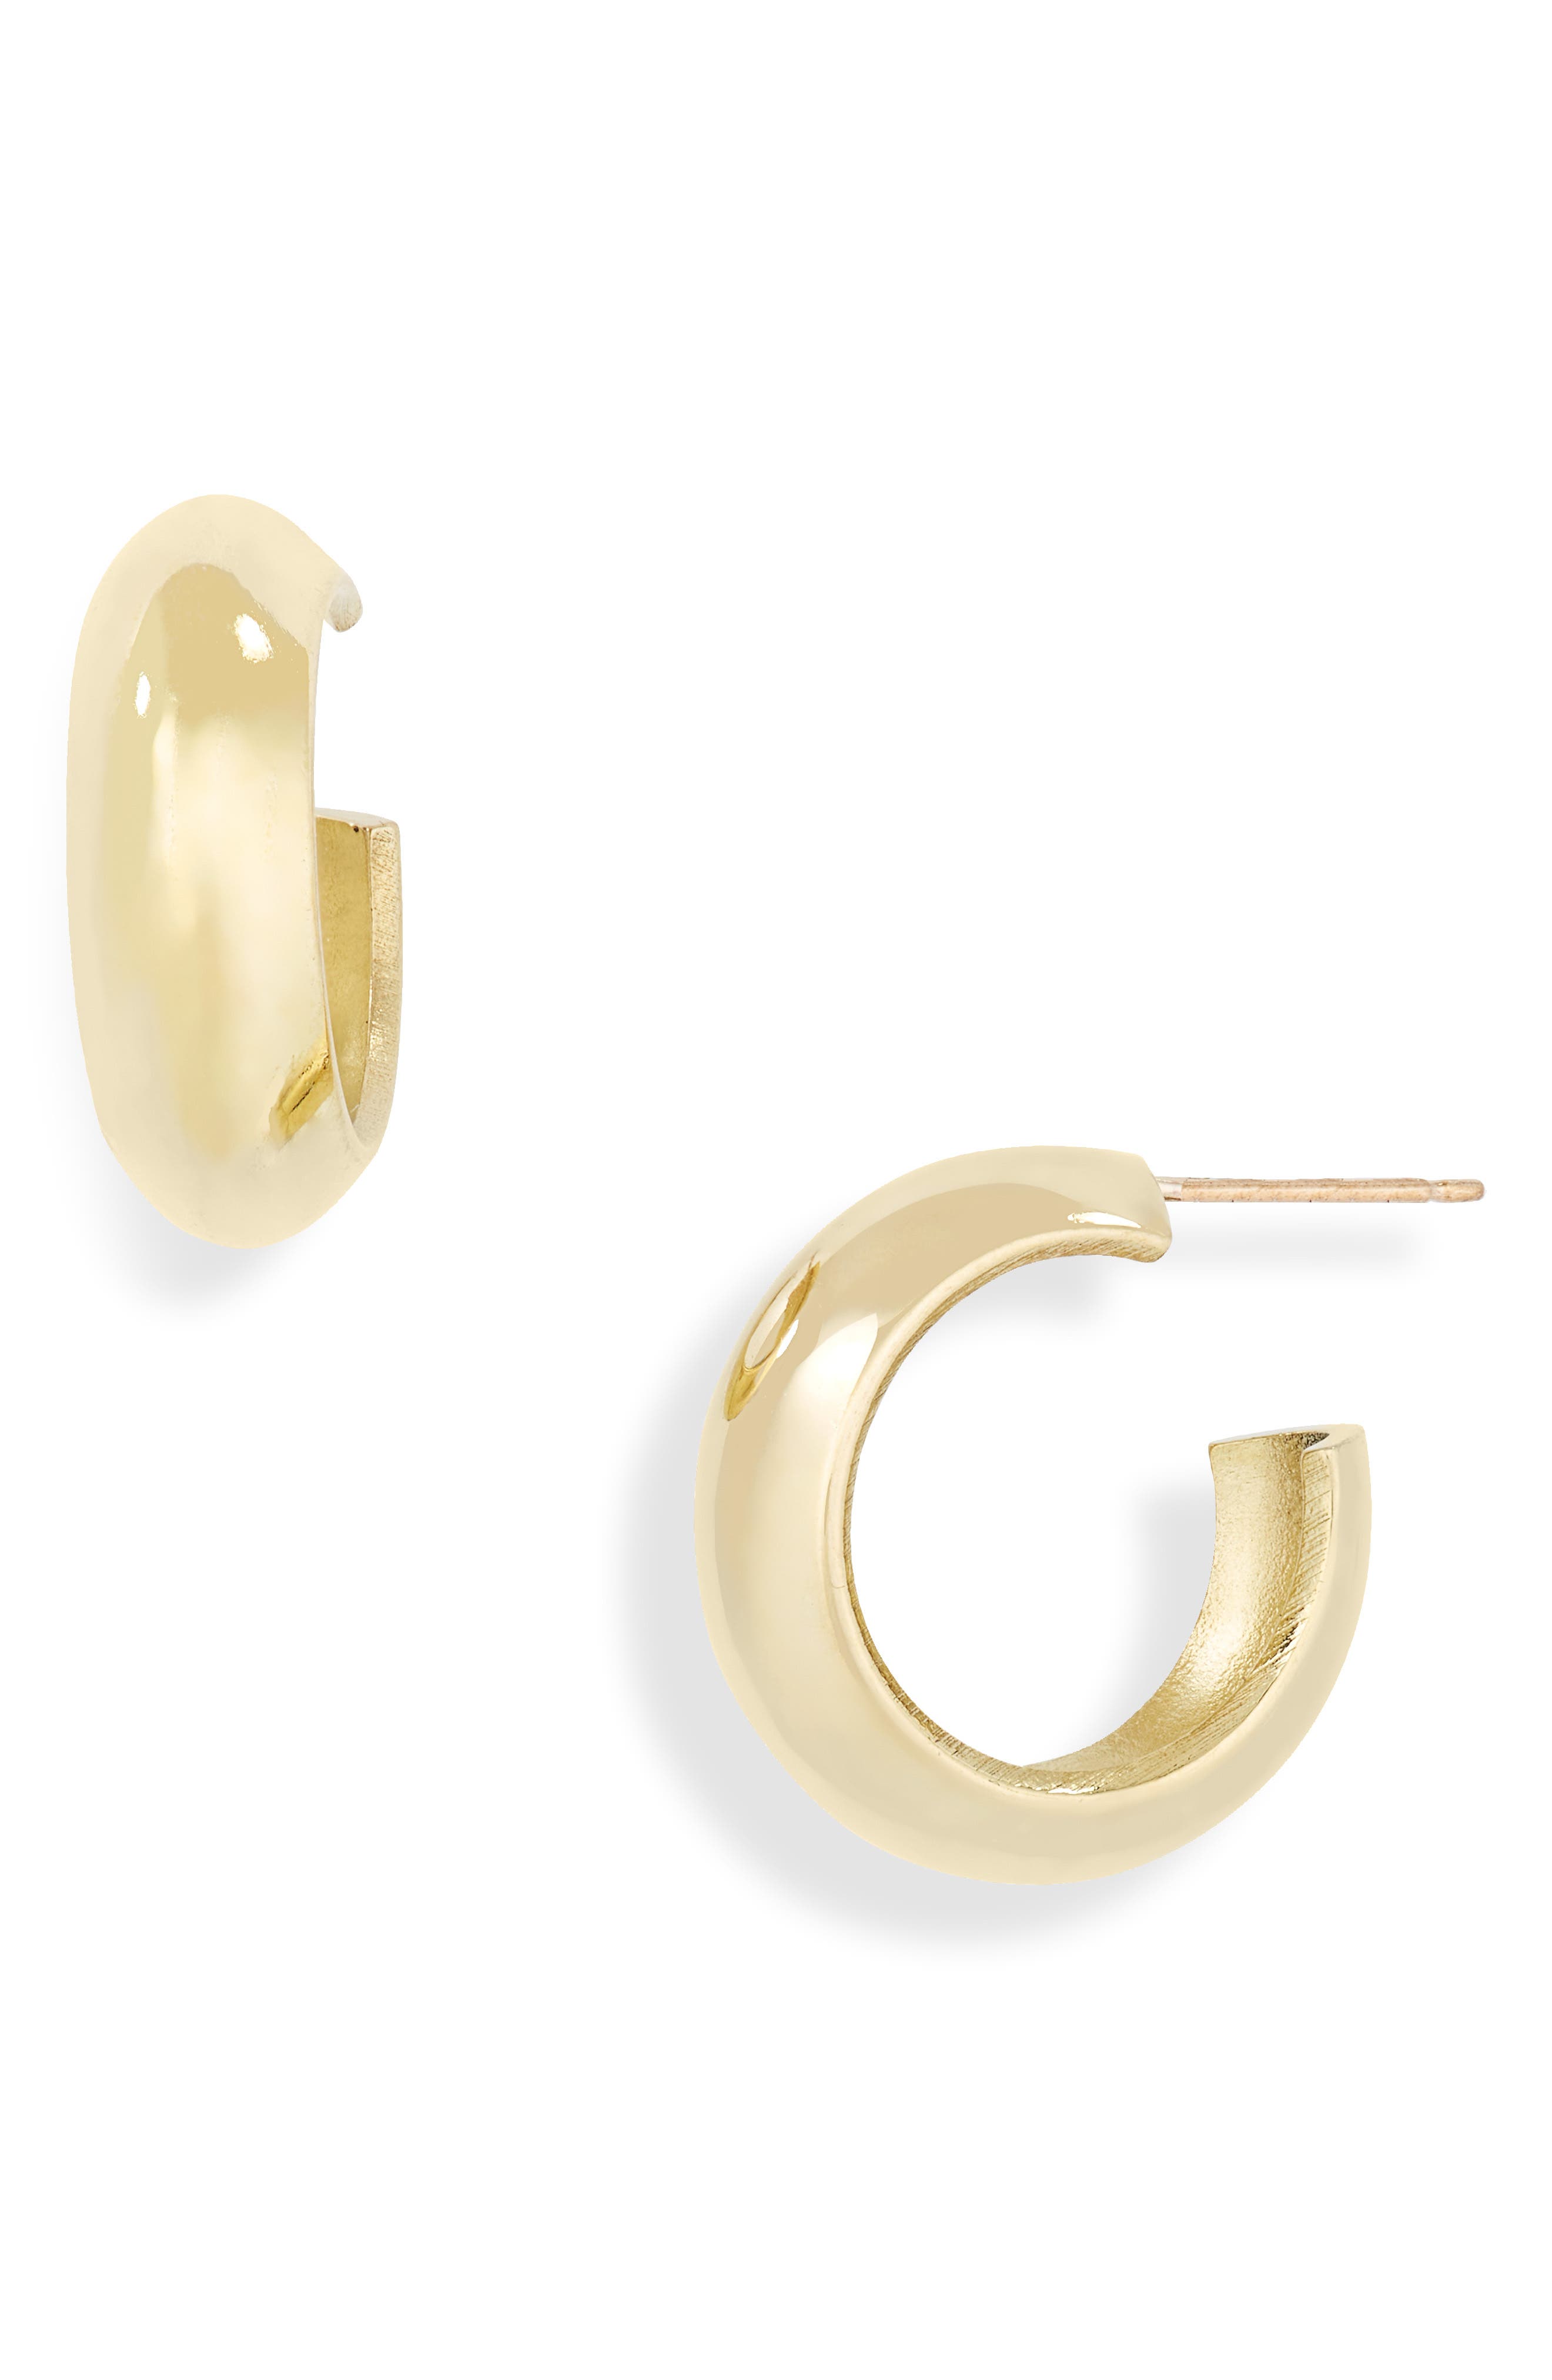 Laura Lombardi Mini Cusp Hoop Earrings in Raw Brass With 14Kt Gold Fill at Nordstrom